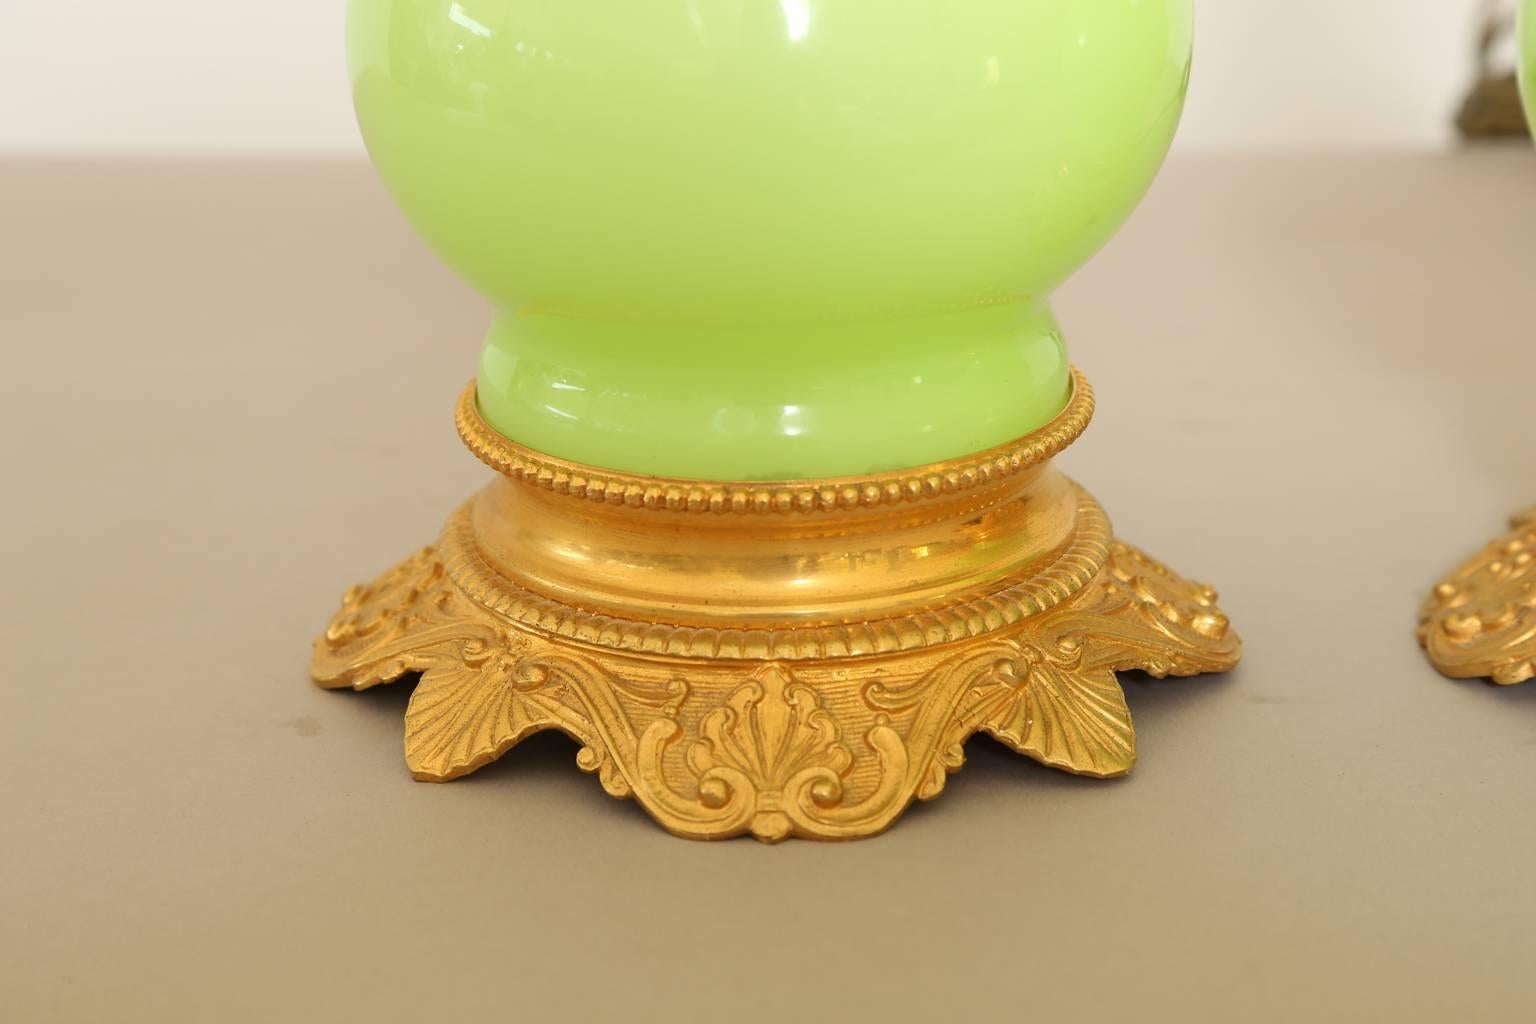 Pair of lamps, originally oil-burning, of lime-green opaline glass, each having a baluster form, with ormolu accents; lamped on serpentine base decorated with scrolling palmettes and scallop shells, its burner collar with detailed, pierced neck.